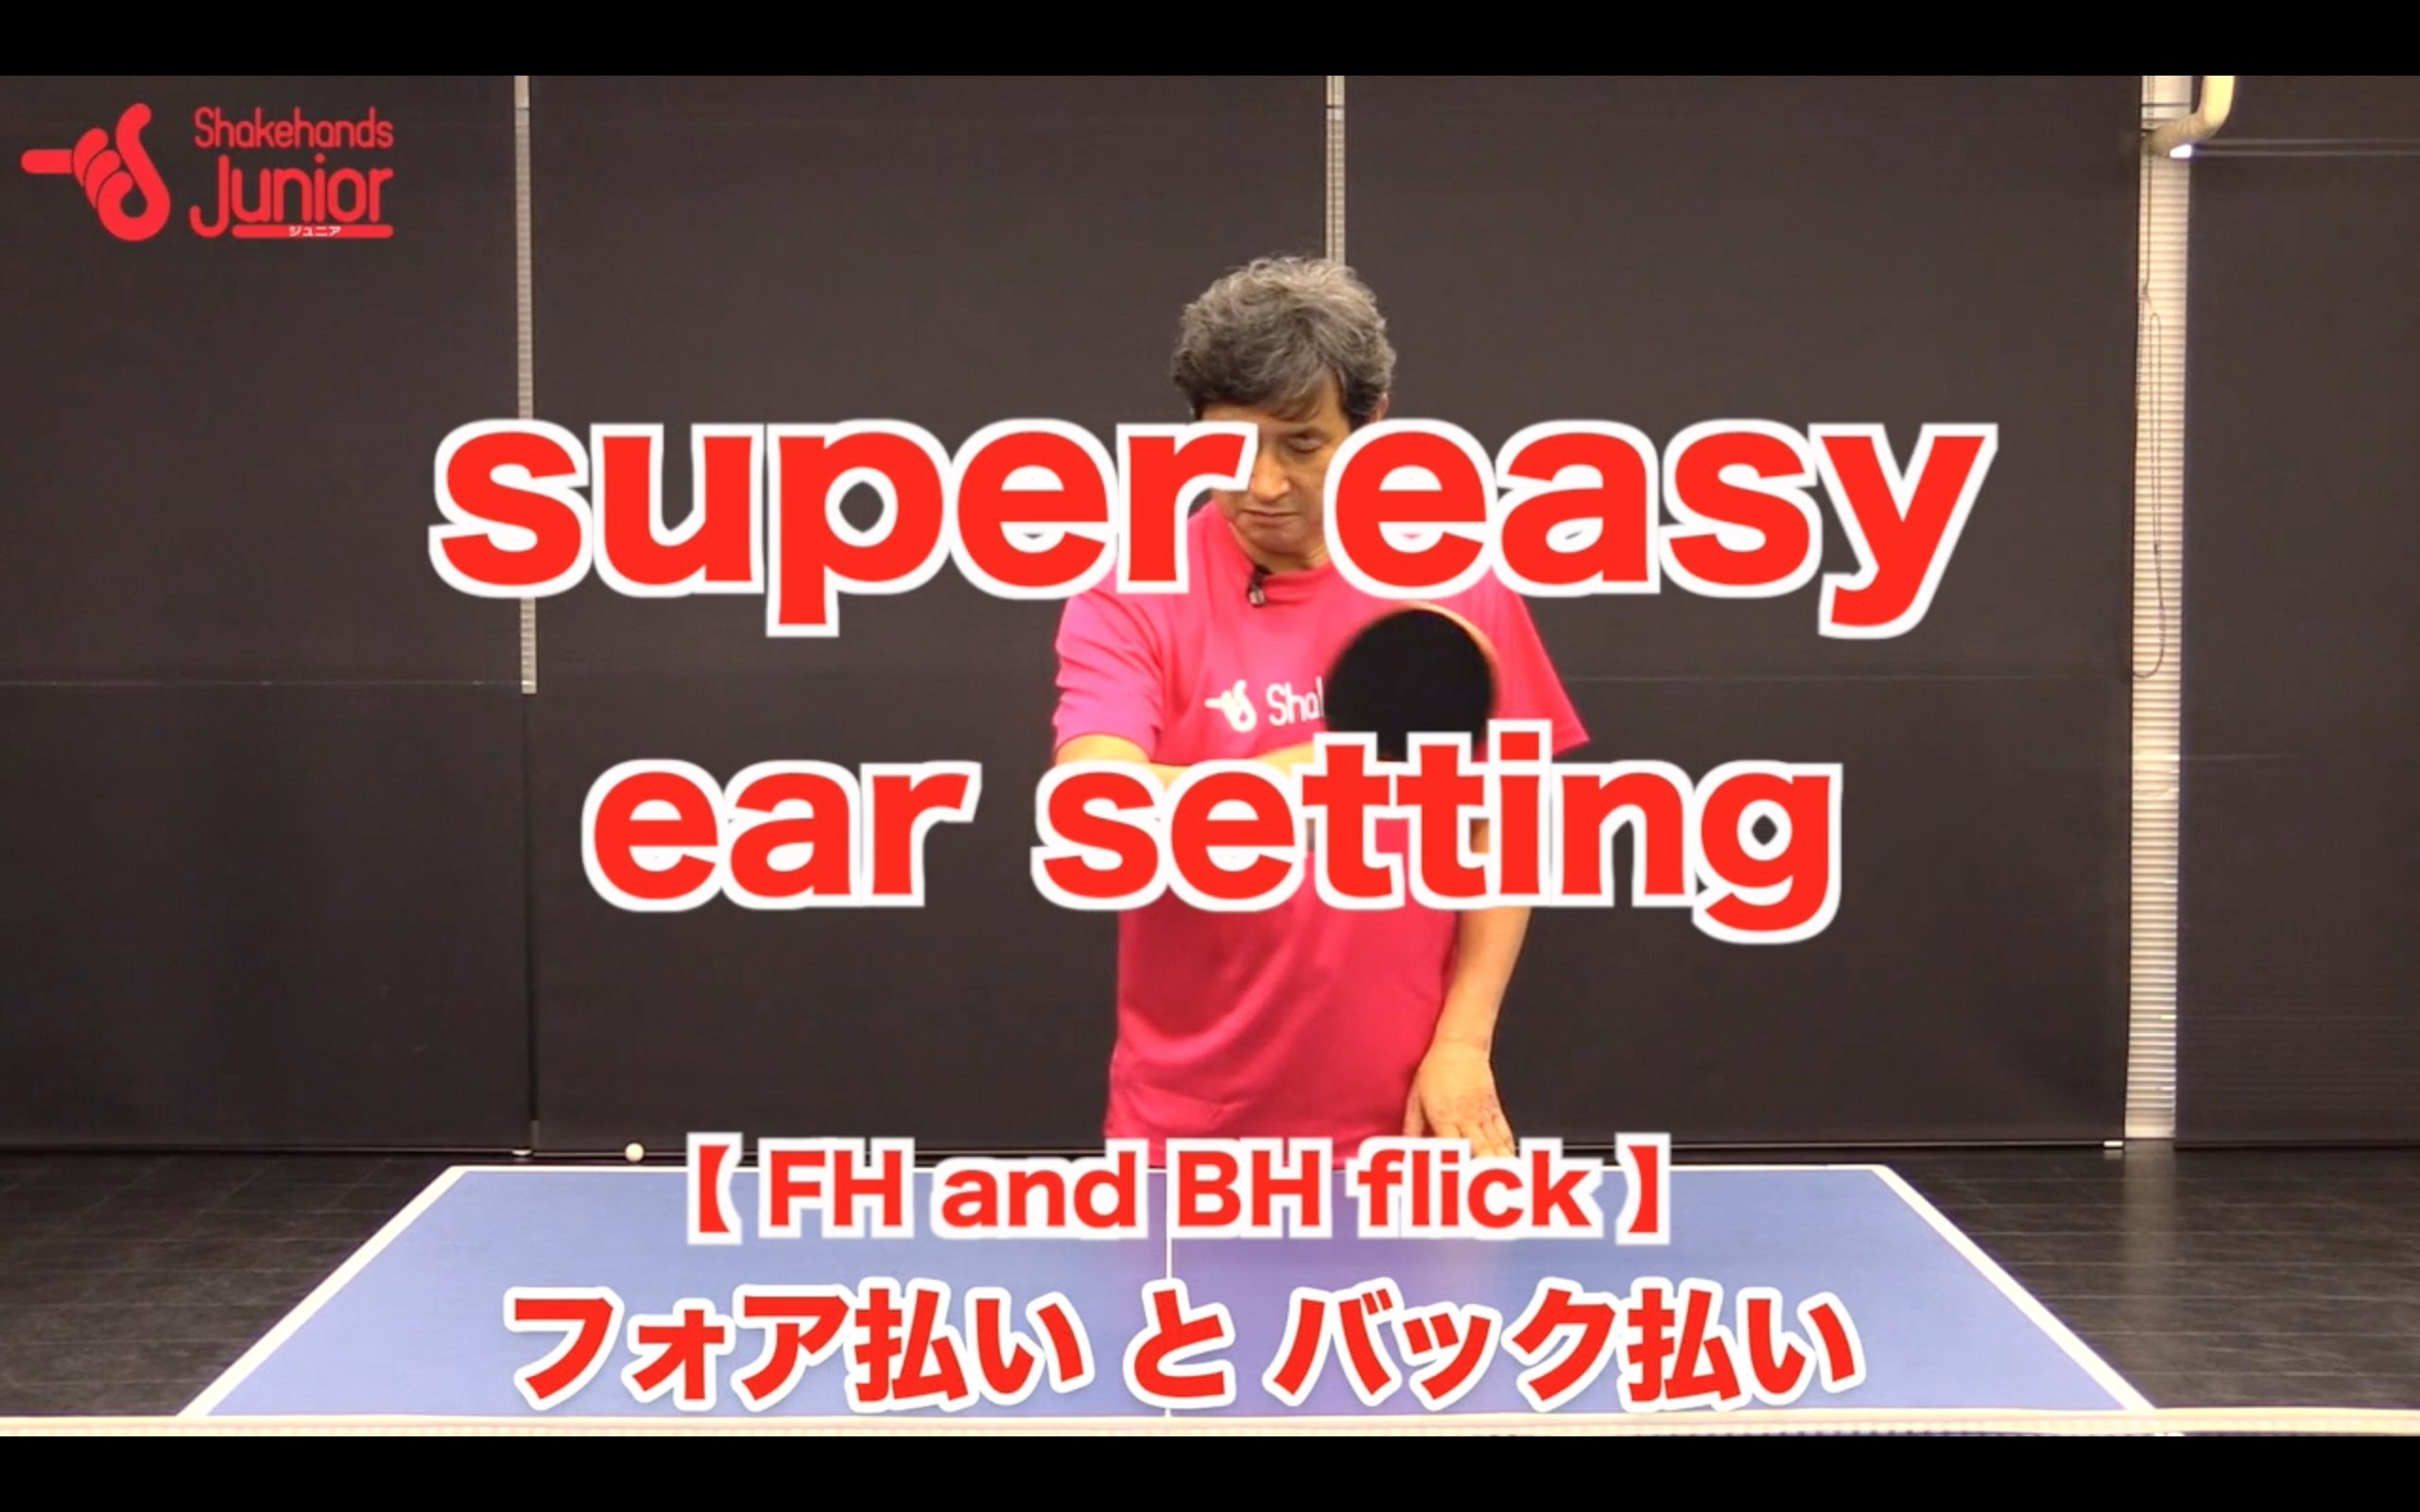 Super easy setting ear FH and BH flick